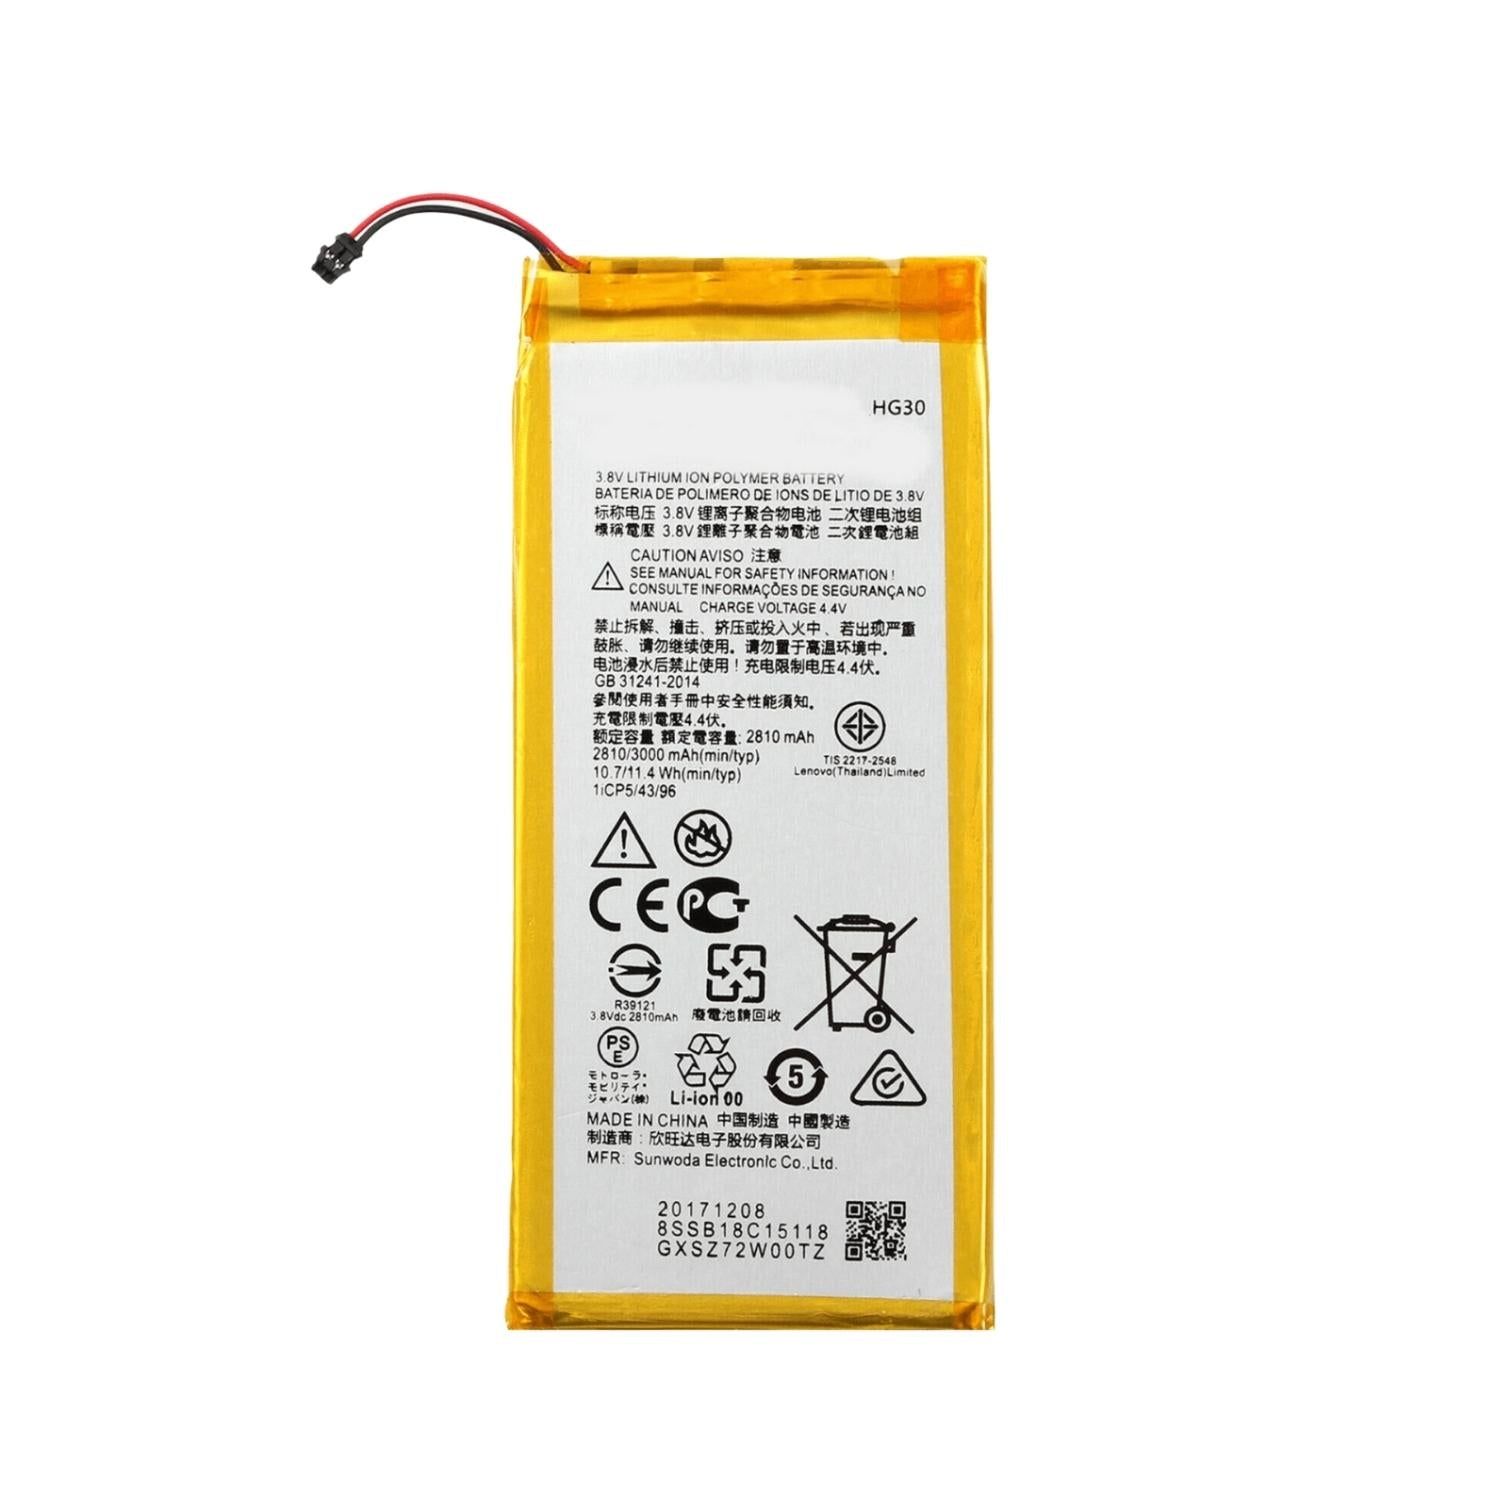 Replacement Battery For Moto G6 / G5S Plus / G5S (HG30)